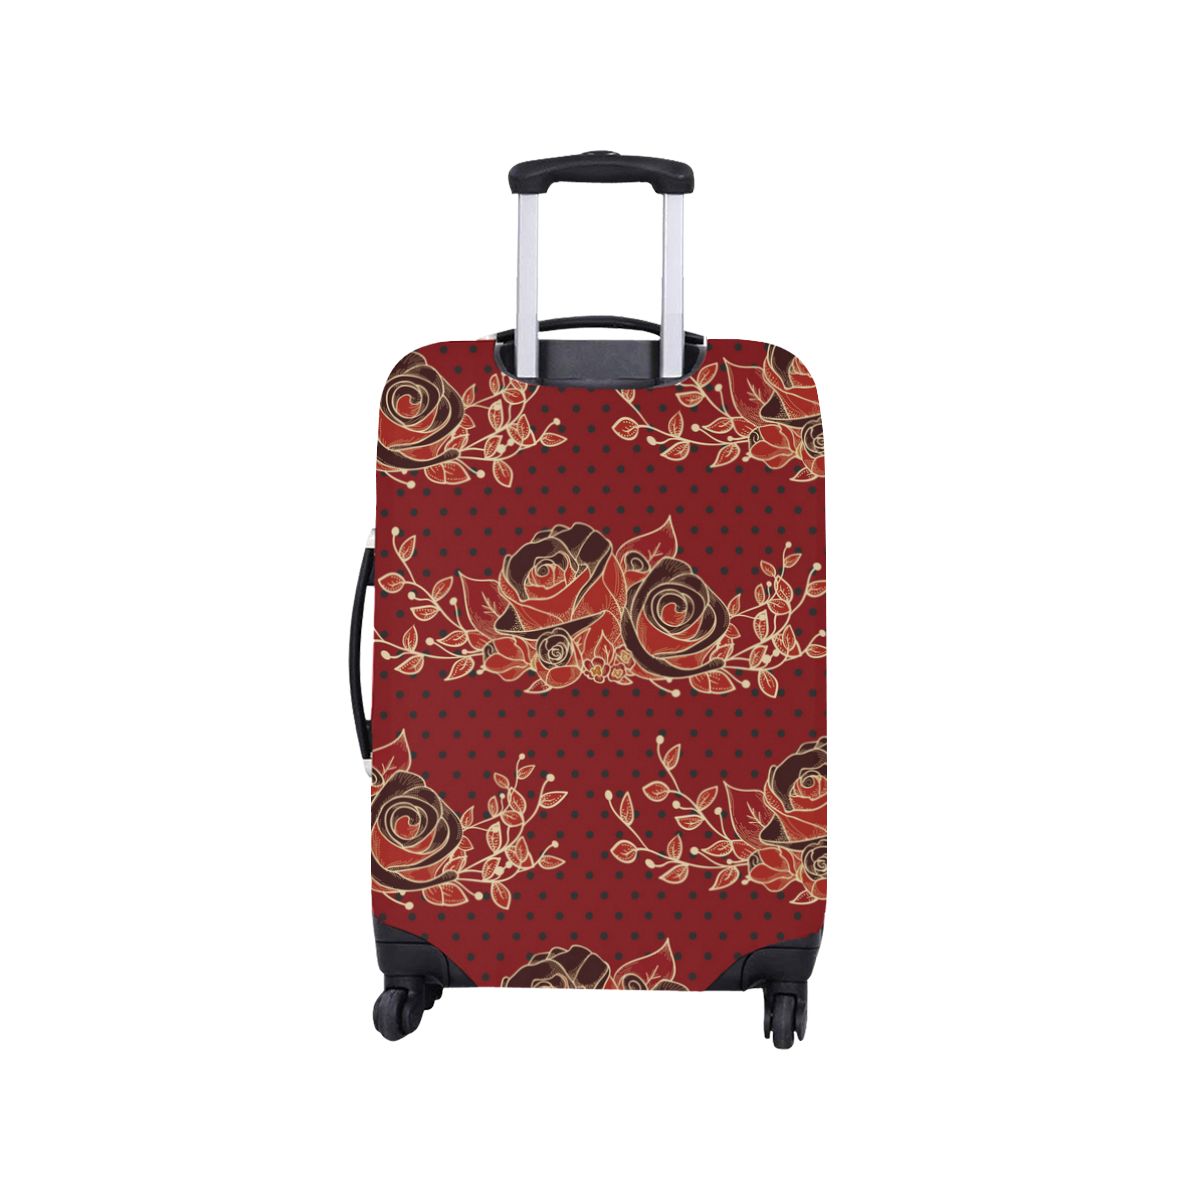 Dotwork Roses Bouquet - Dark Red Blck Luggage Cover/Small 18"-21"